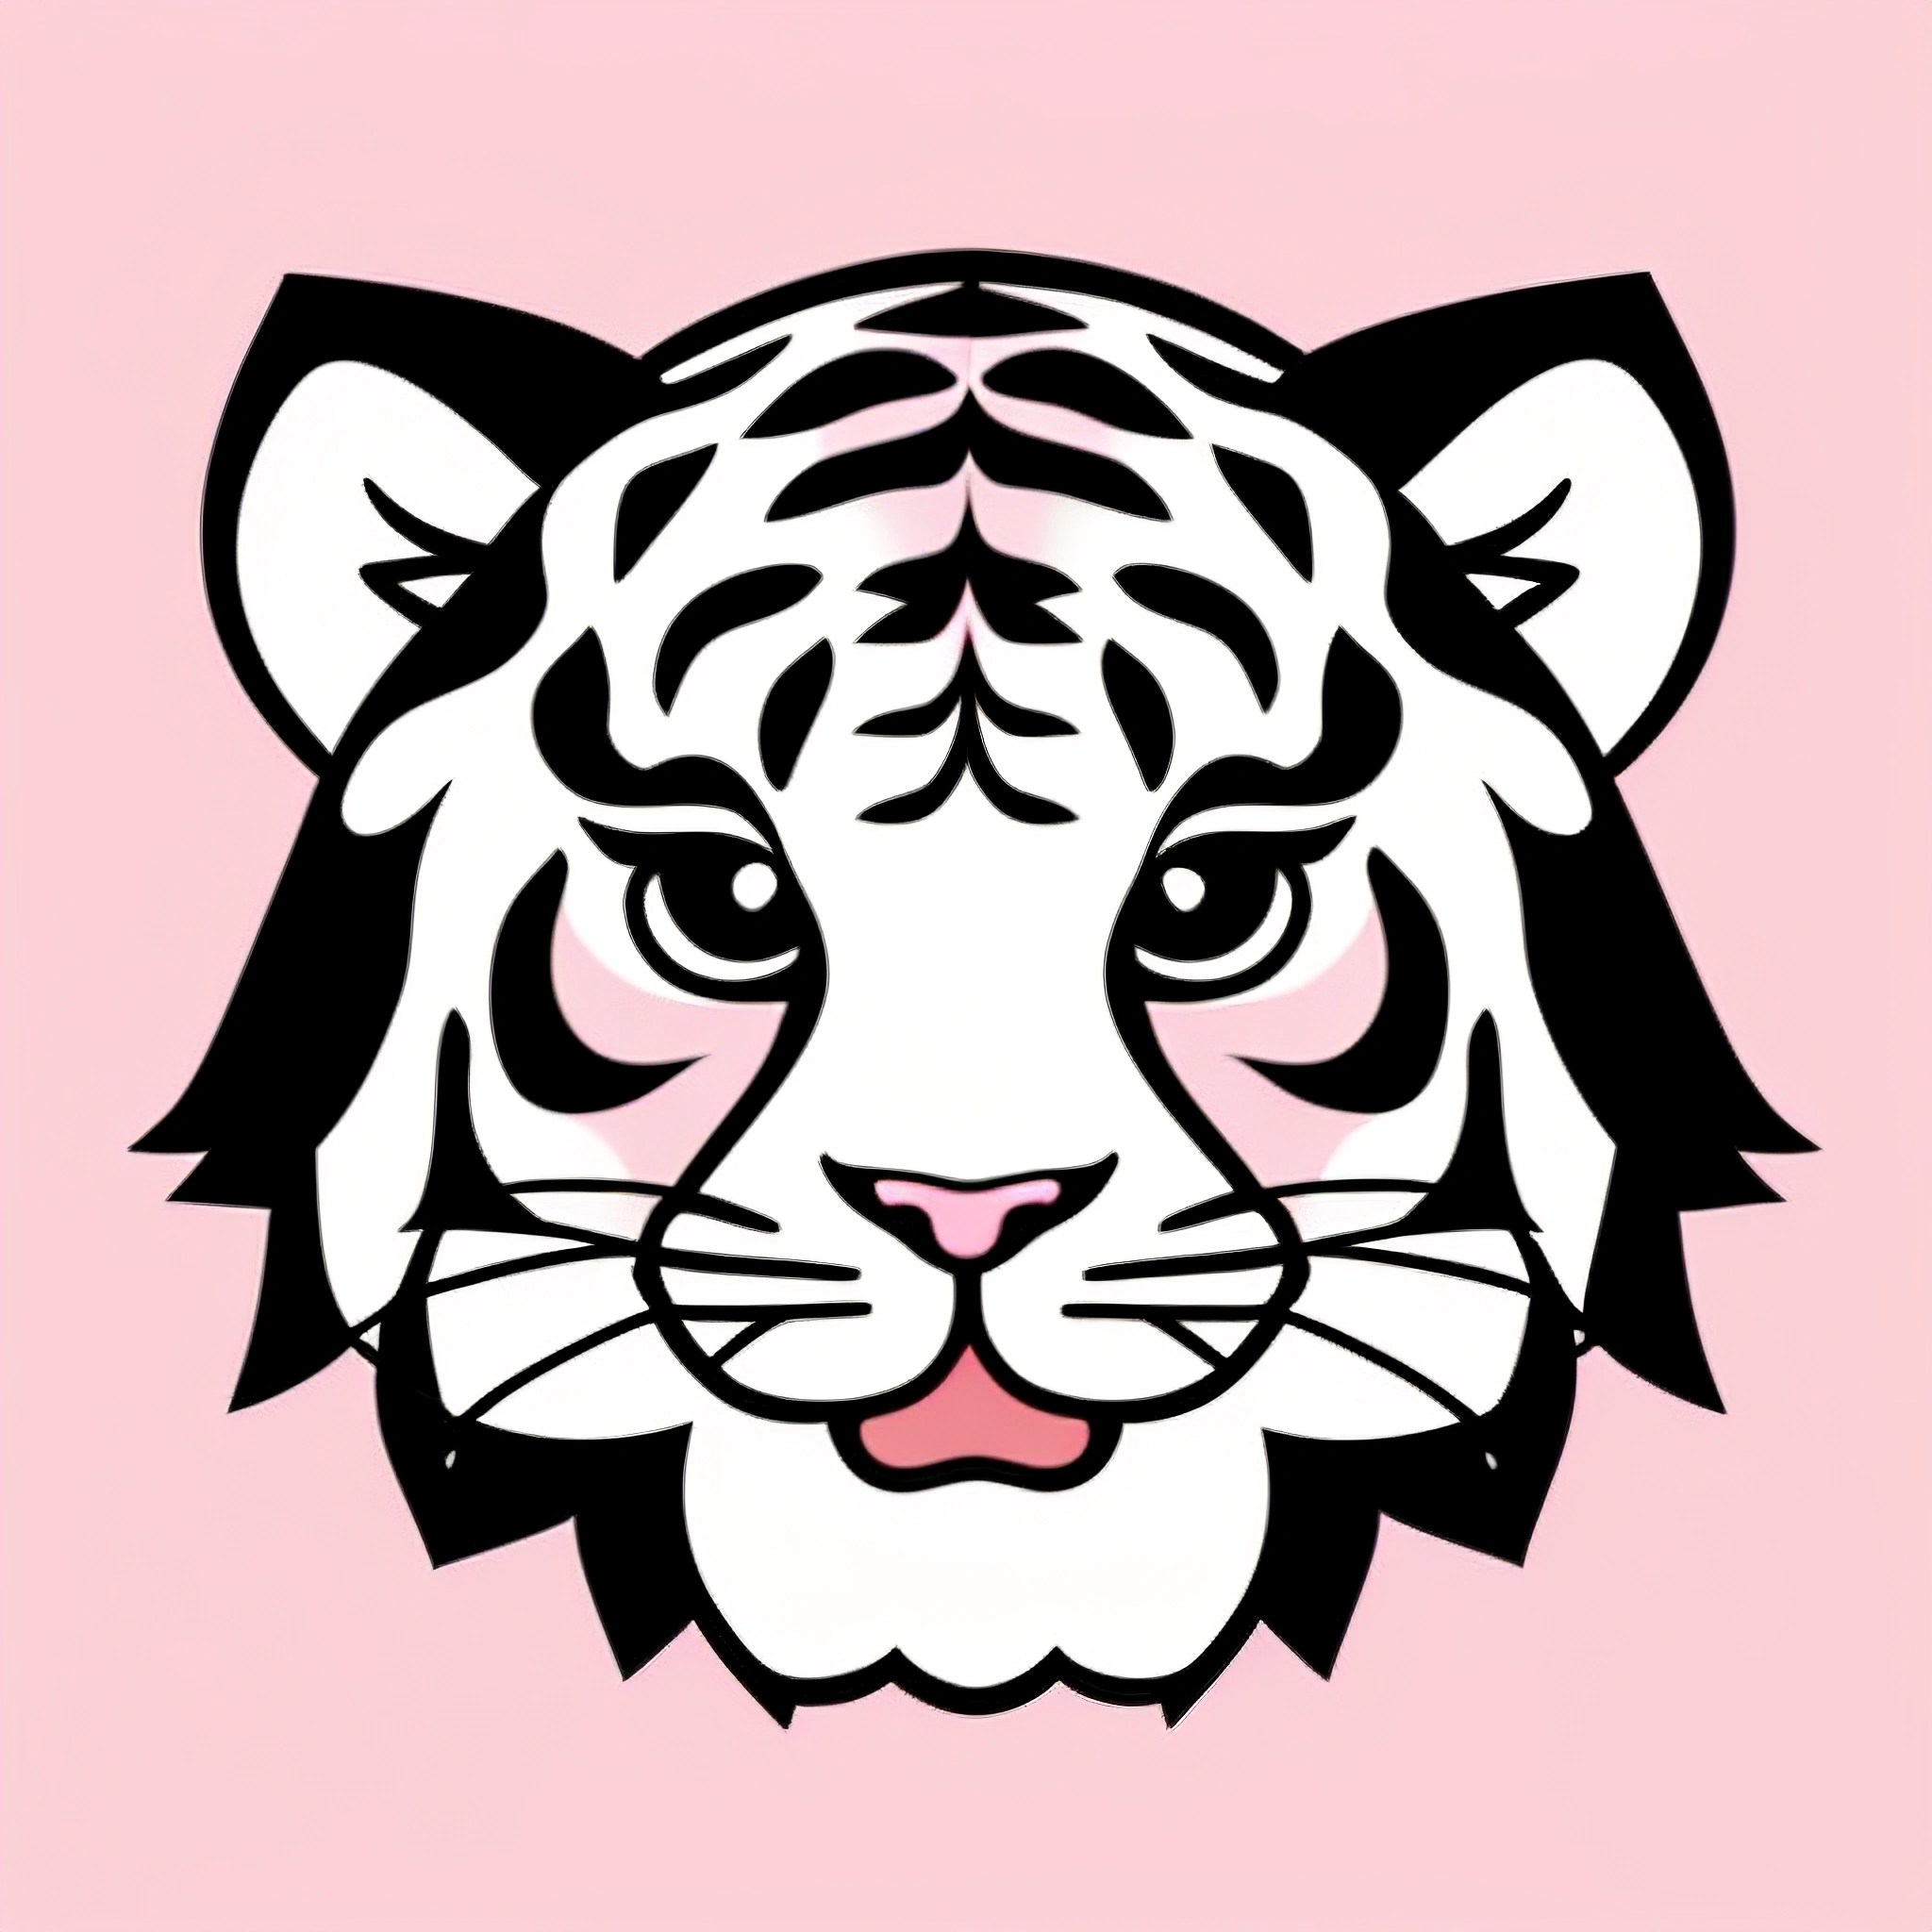 a drawing of a tiger's face on a pink background